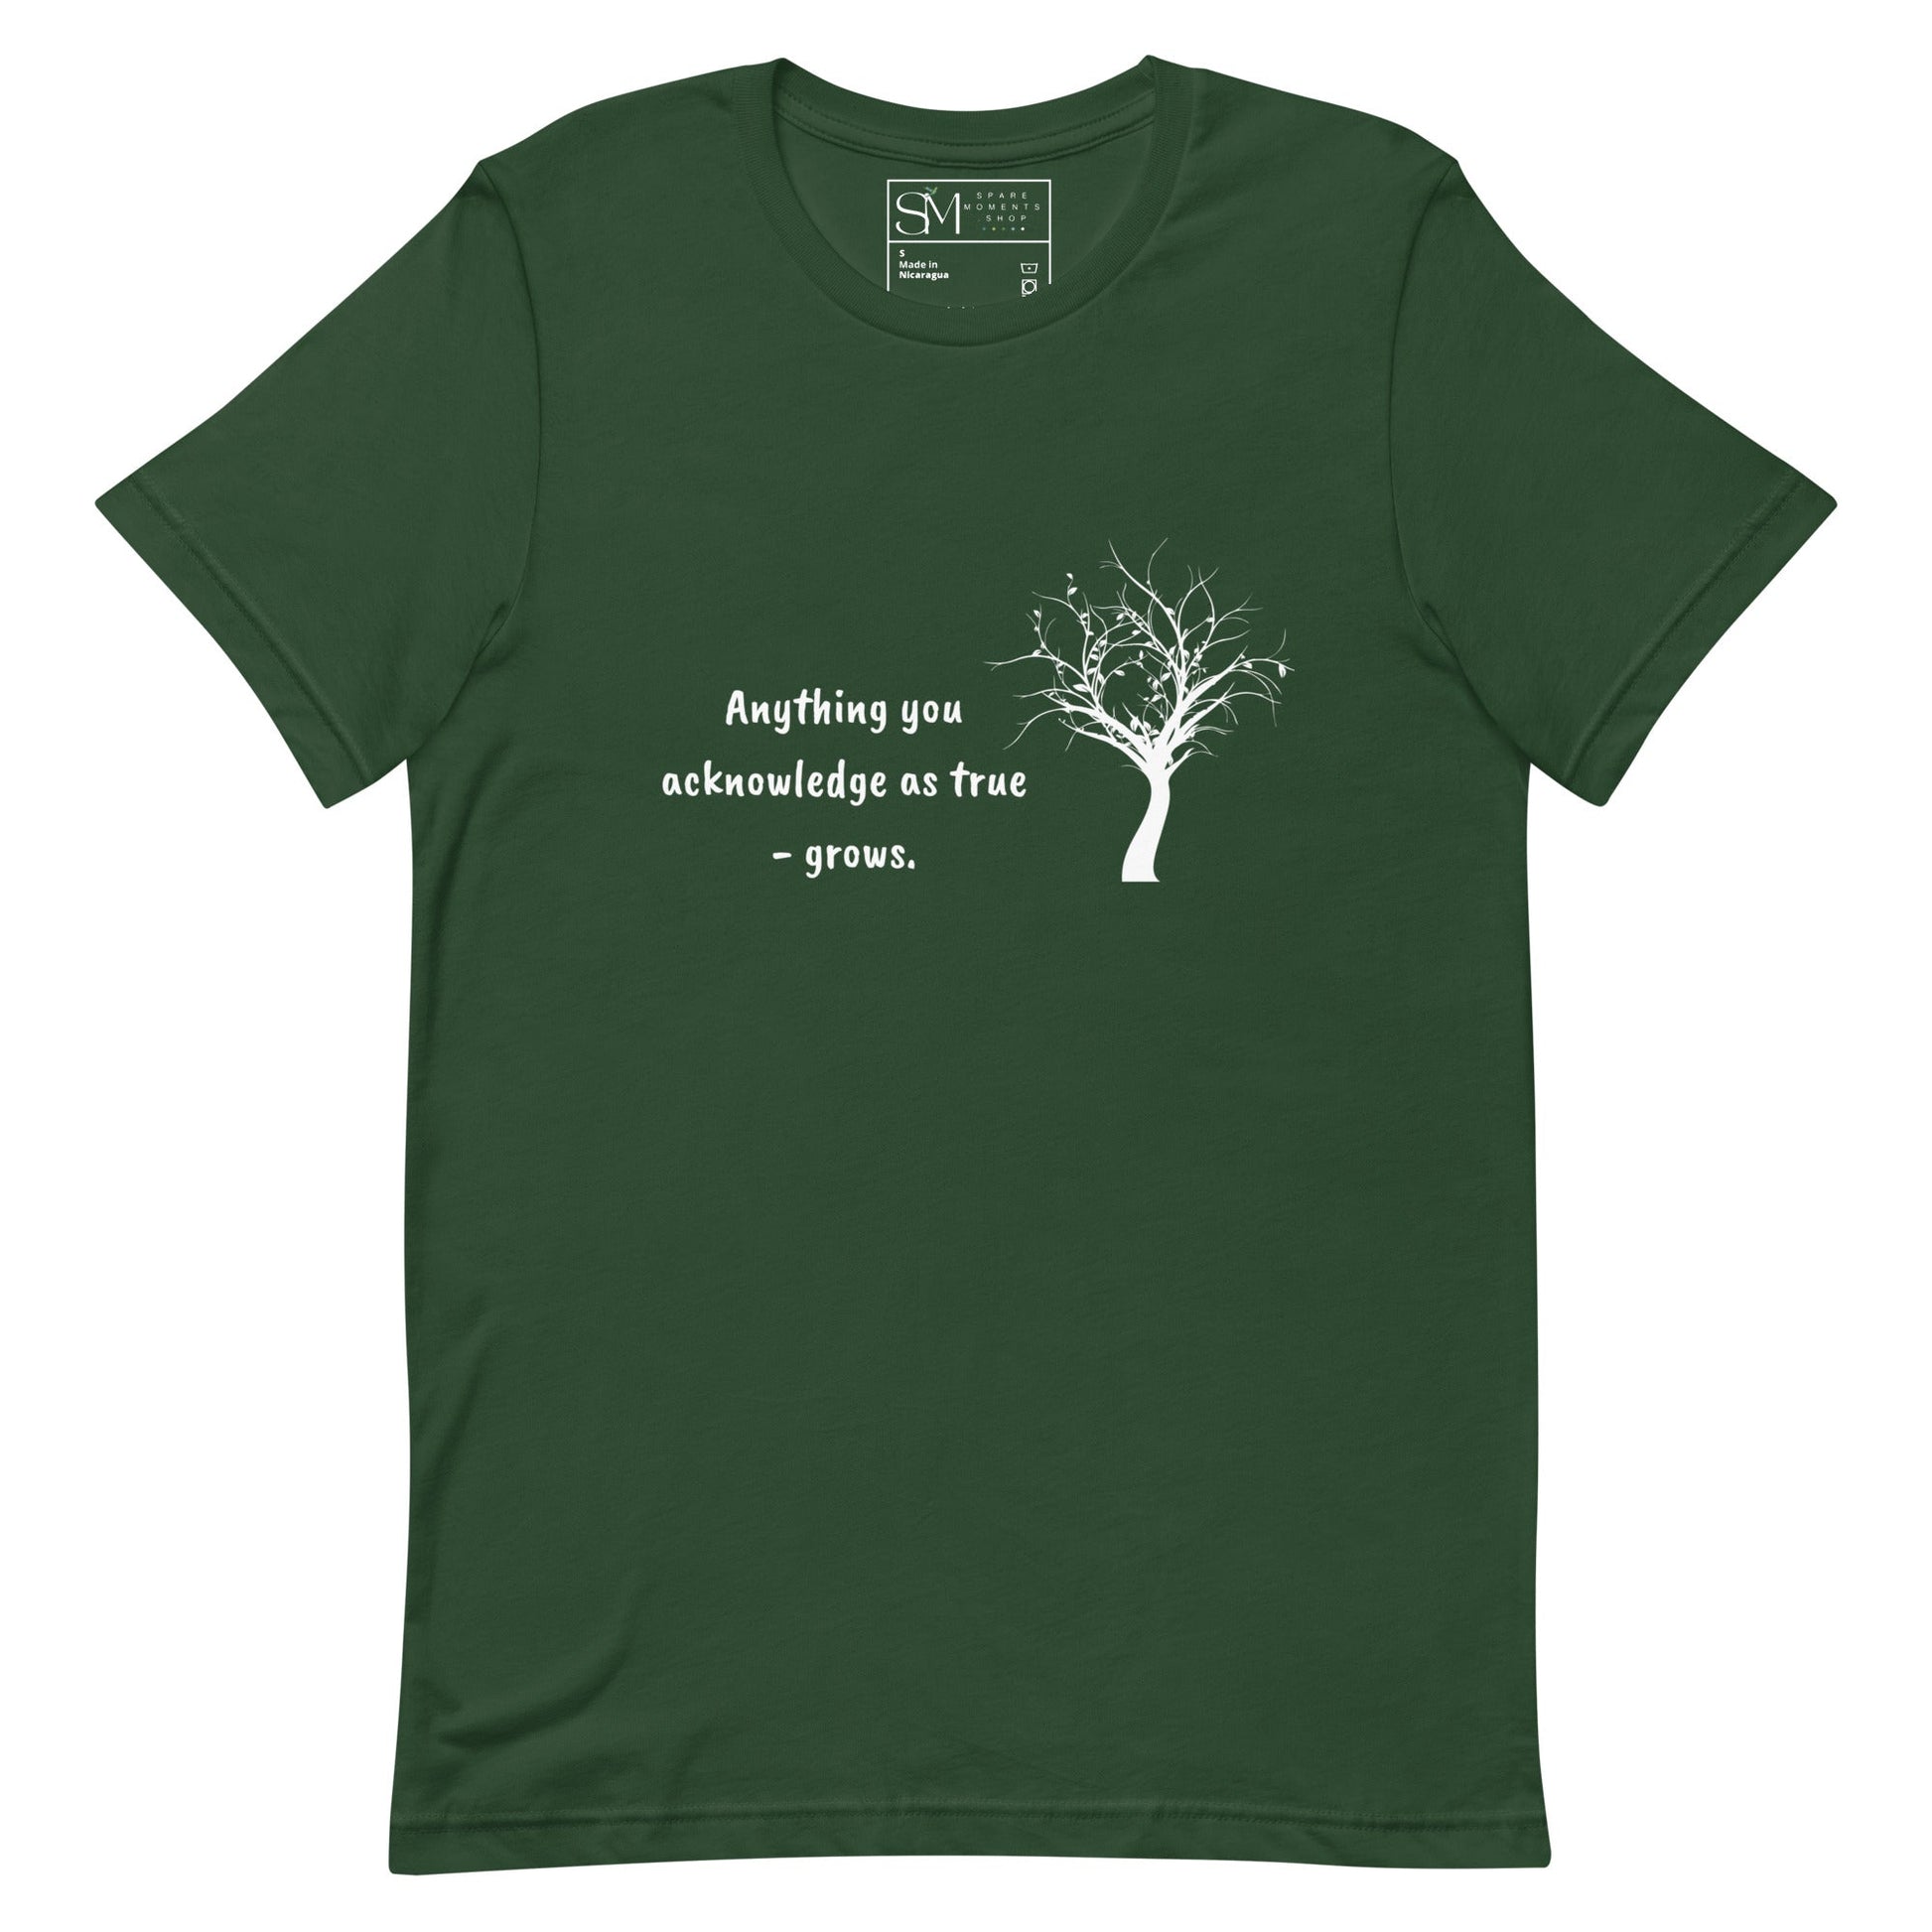 Unisex Graphic Tee | Motivational Sayings Graphic T-Shirts